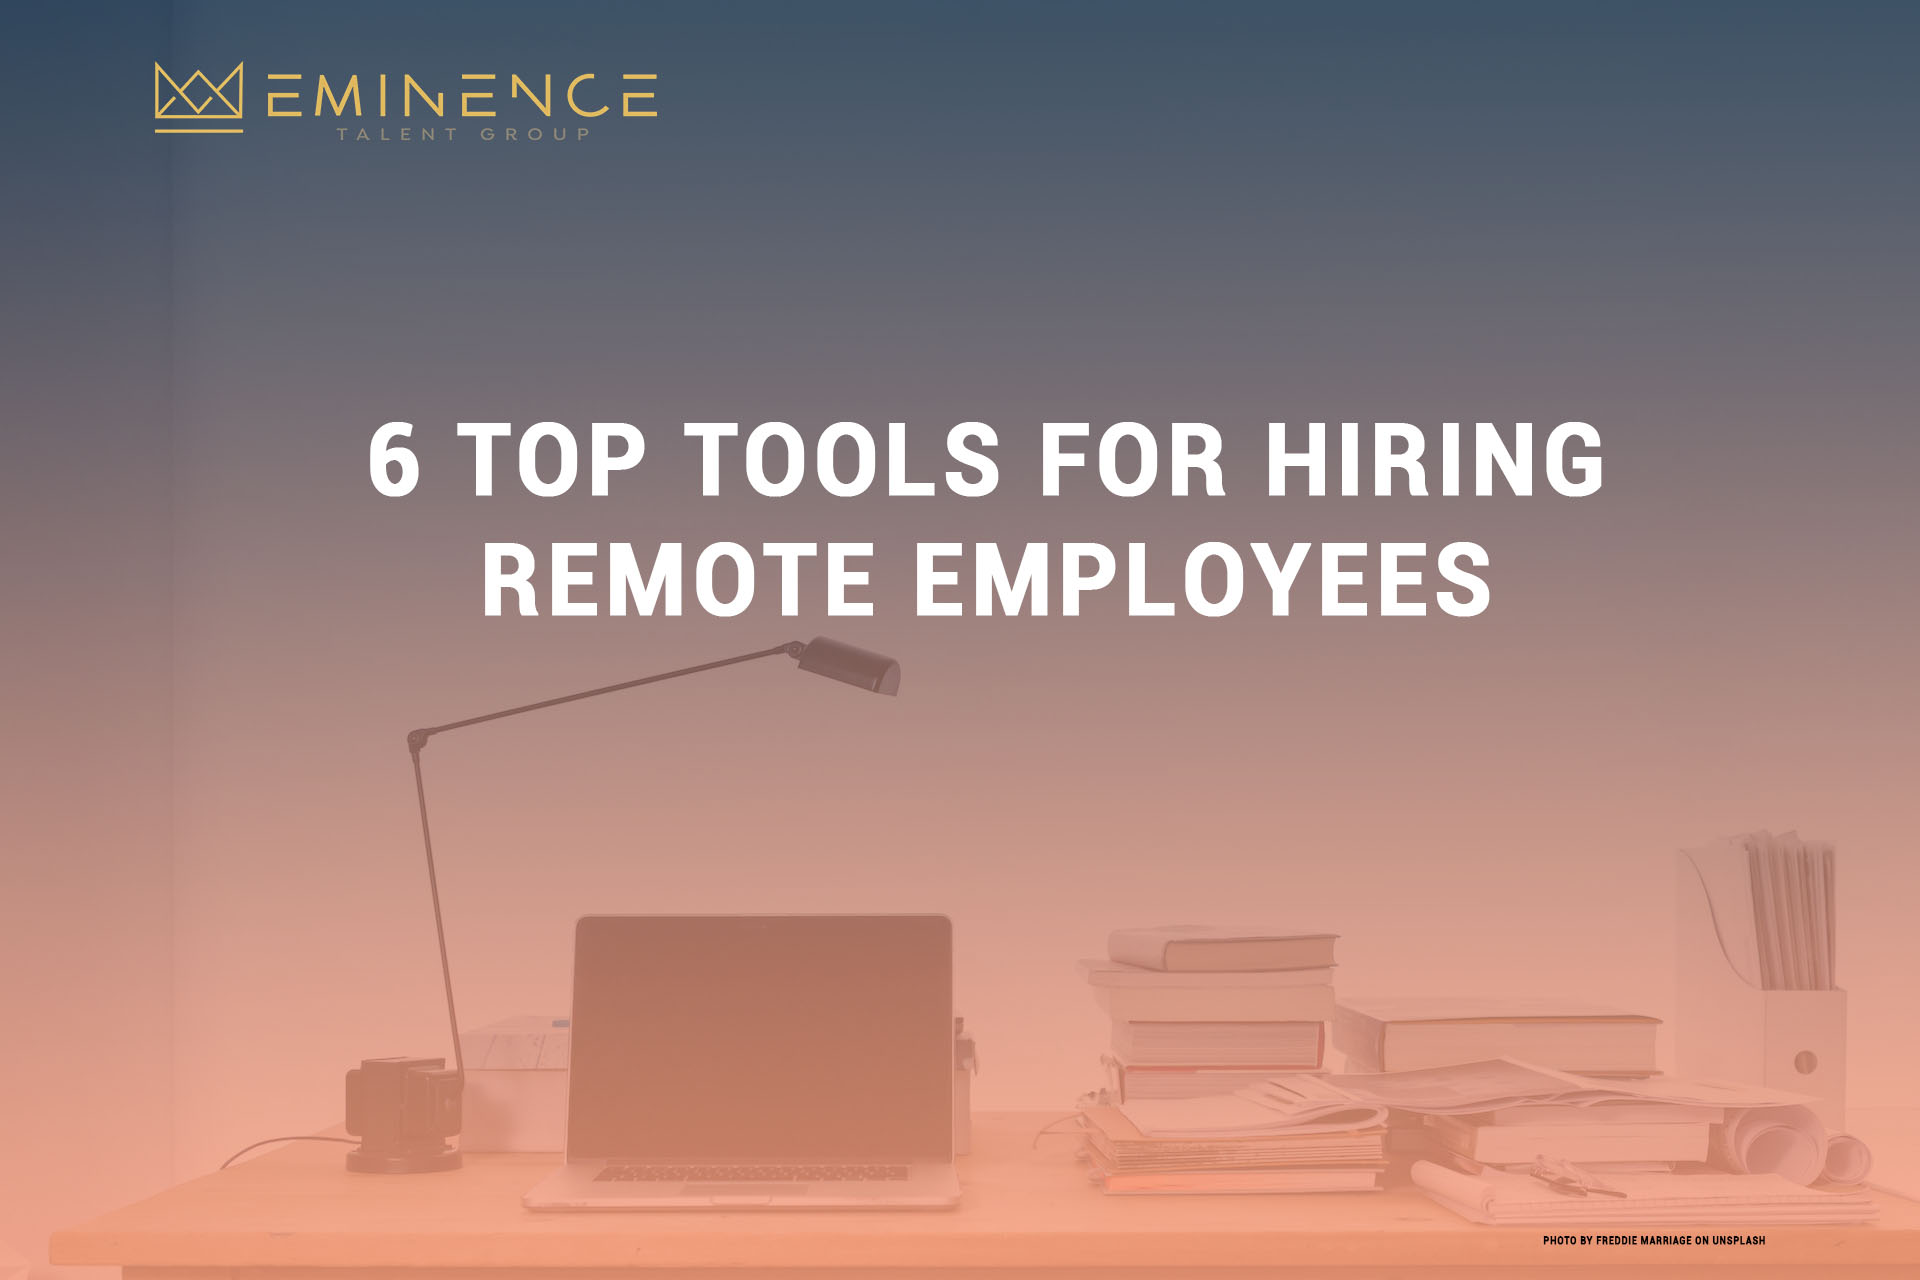 6 Top Tools for Hiring Remote Employees